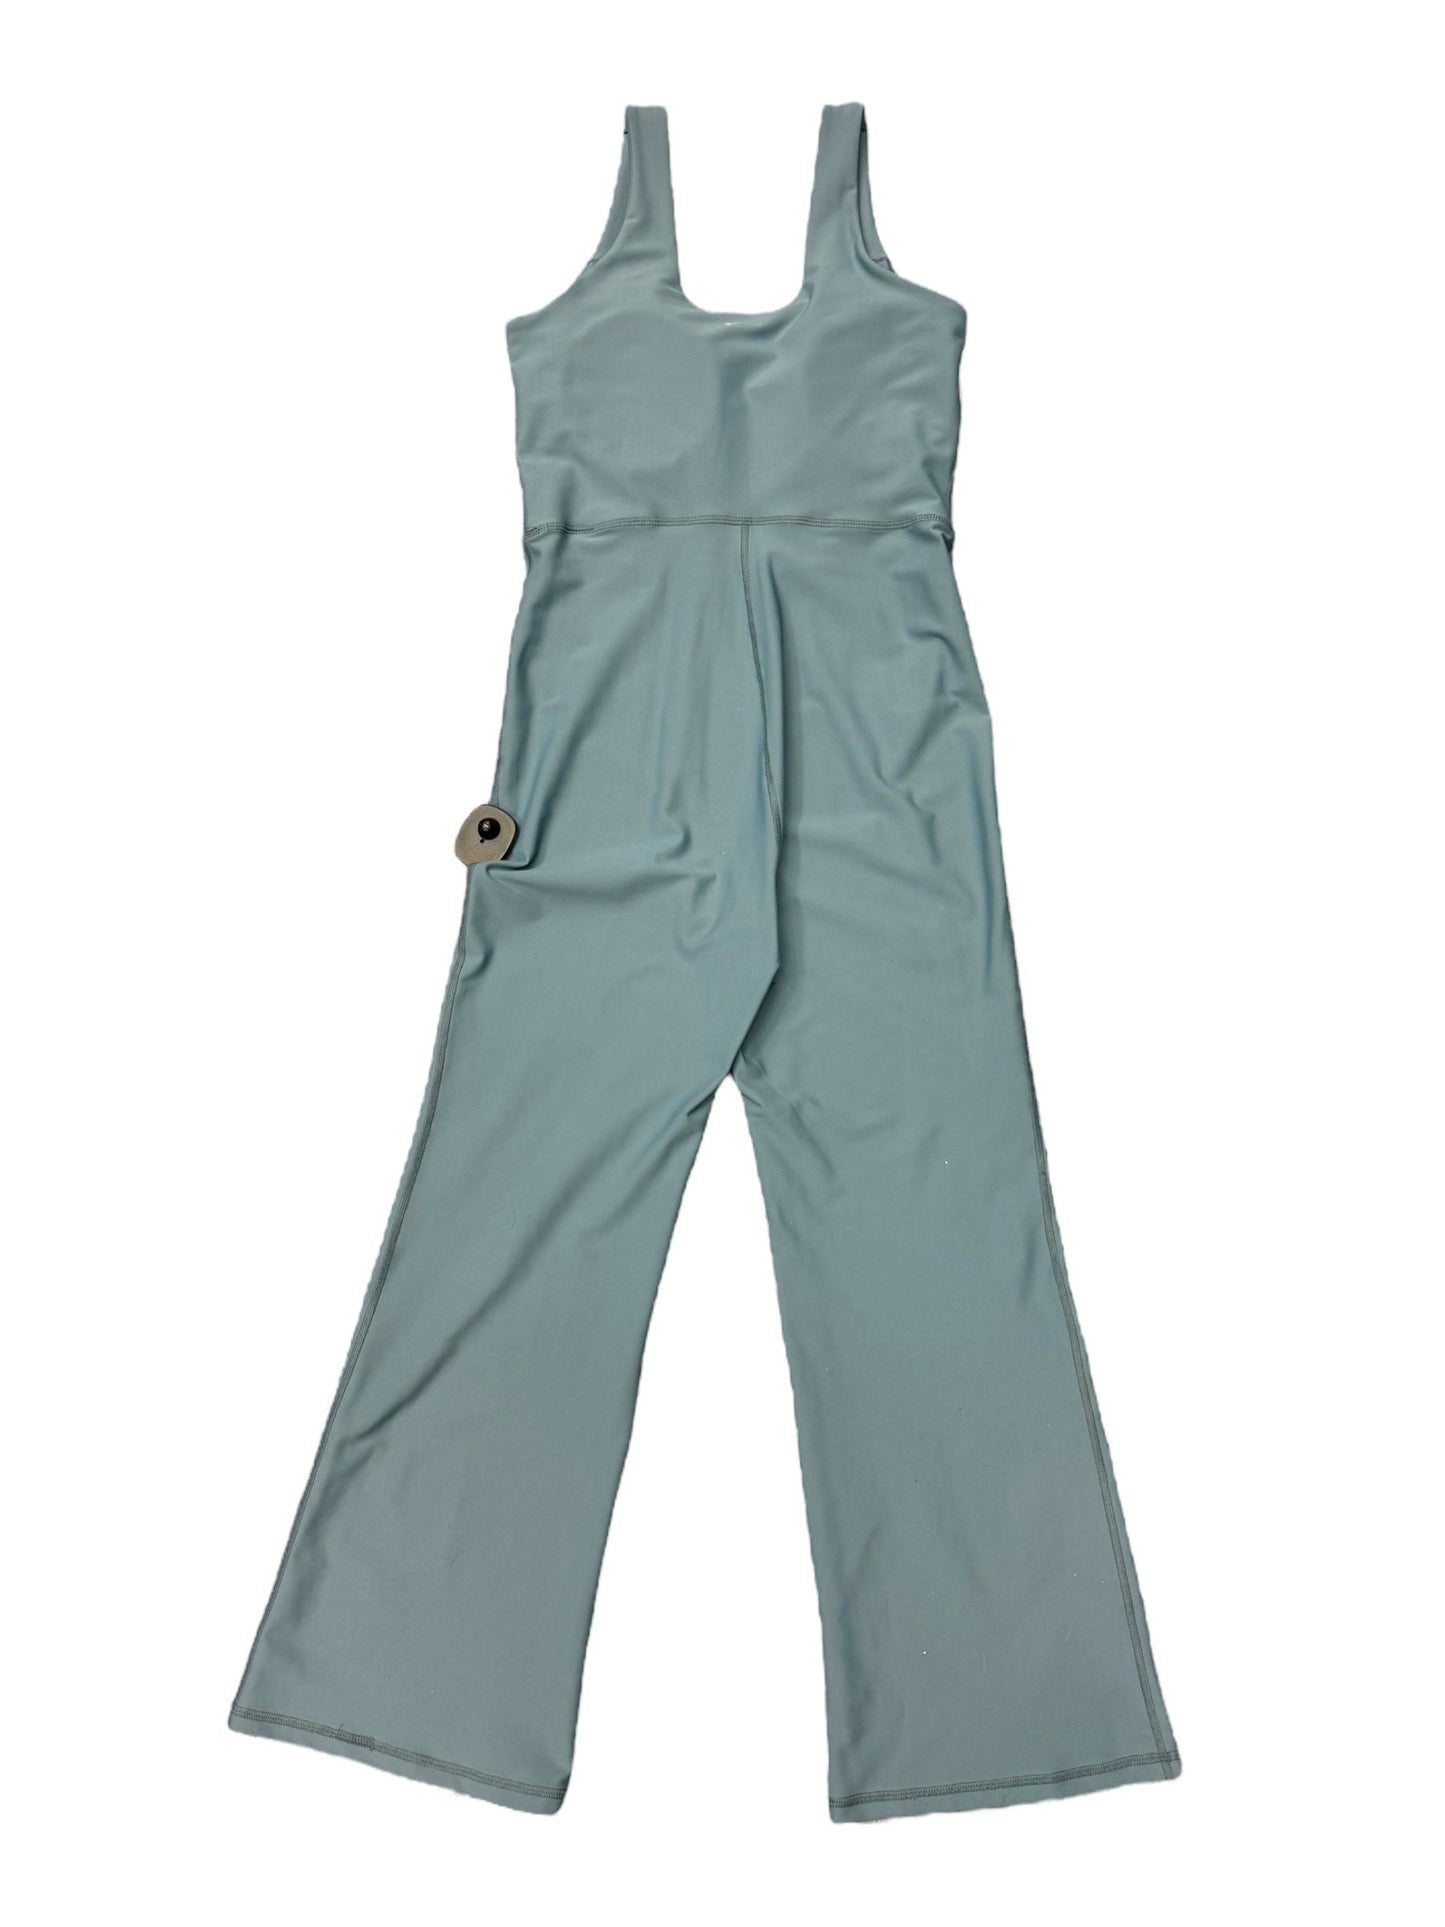 Teal Jumpsuit Old Navy, Size M